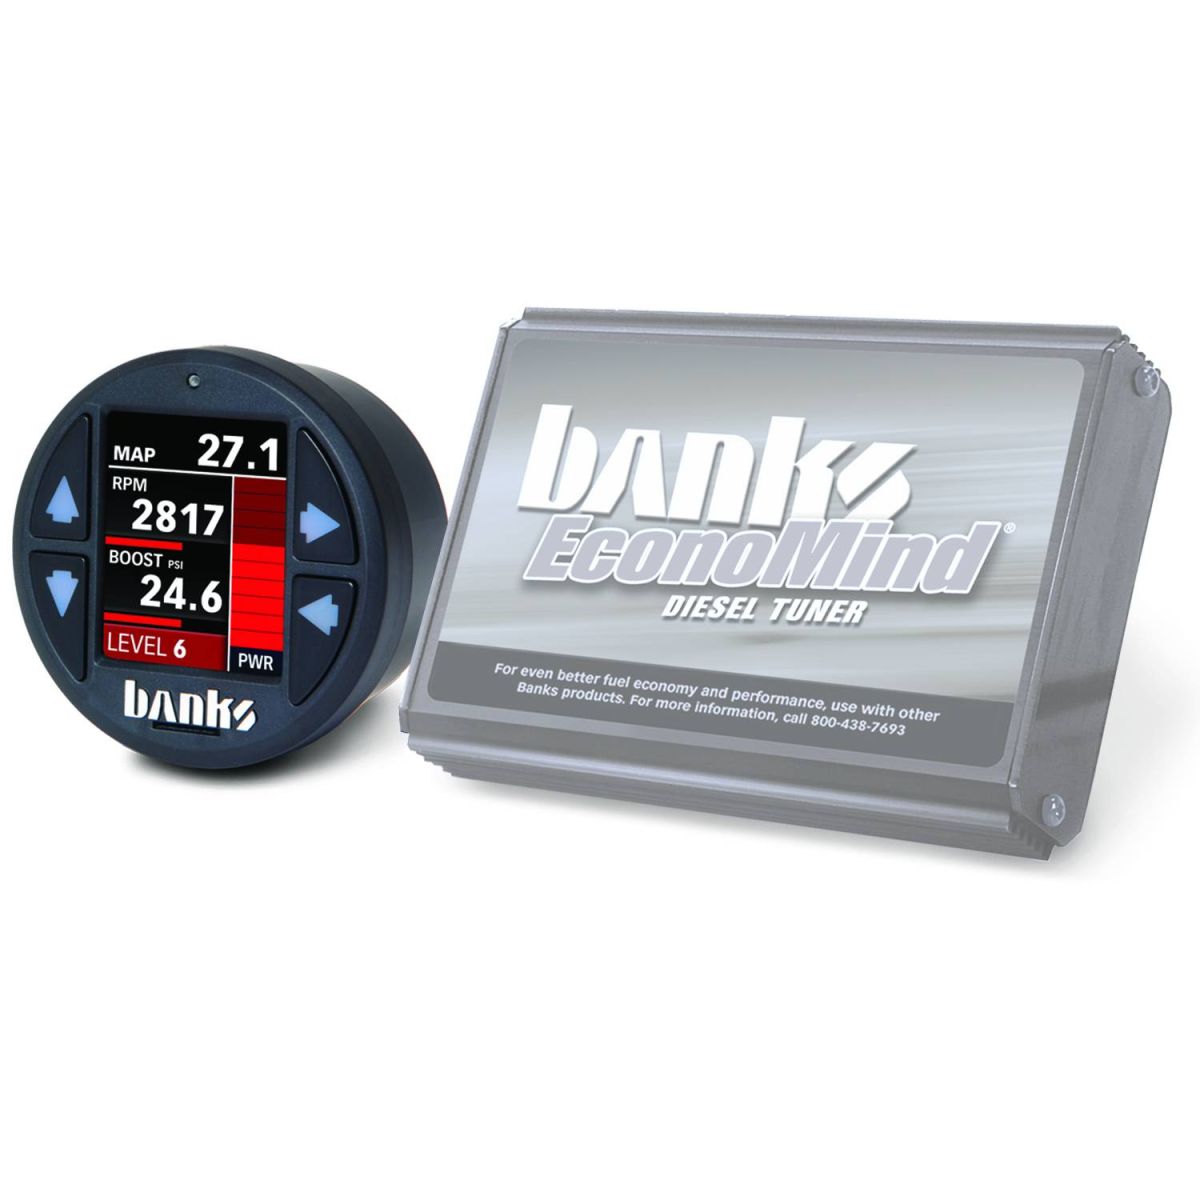 Banks Power - Banks Power Economind Diesel Tuner (PowerPack Calibration) W/iDash 1.8 DataMonster 04-05 Chevy 6.6L LLY